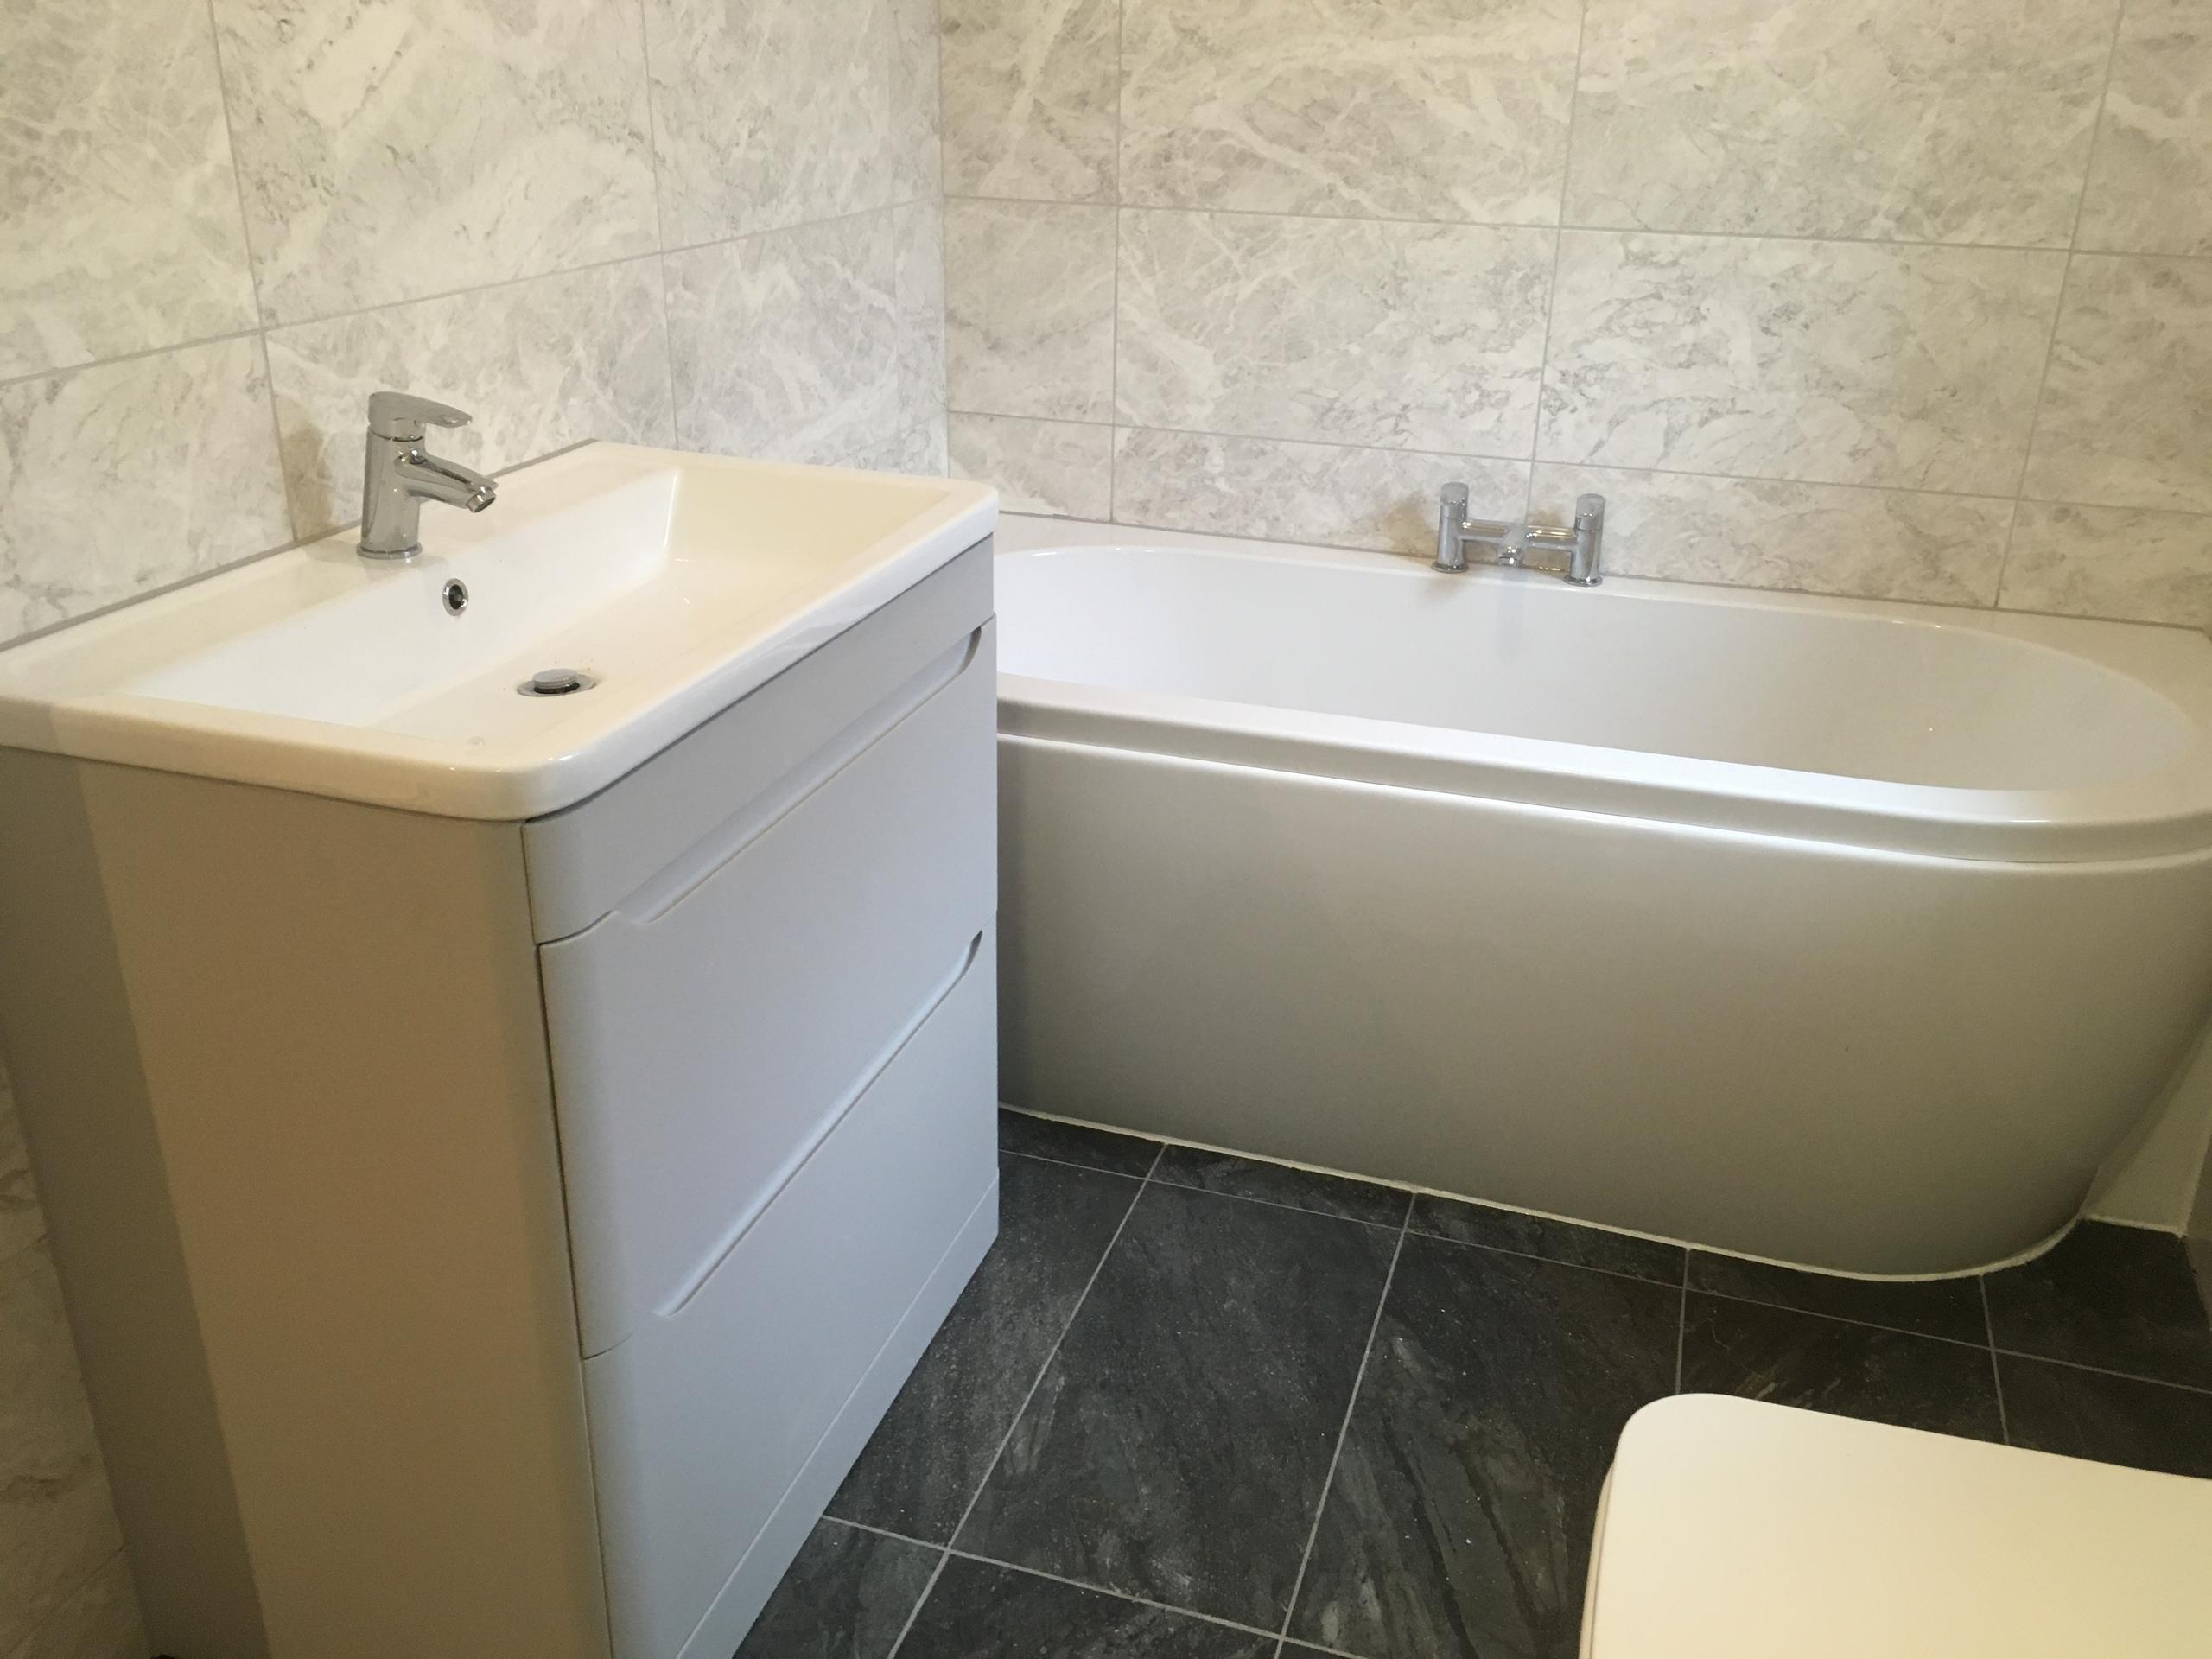 Full installation of double ended bath and basin upon unit